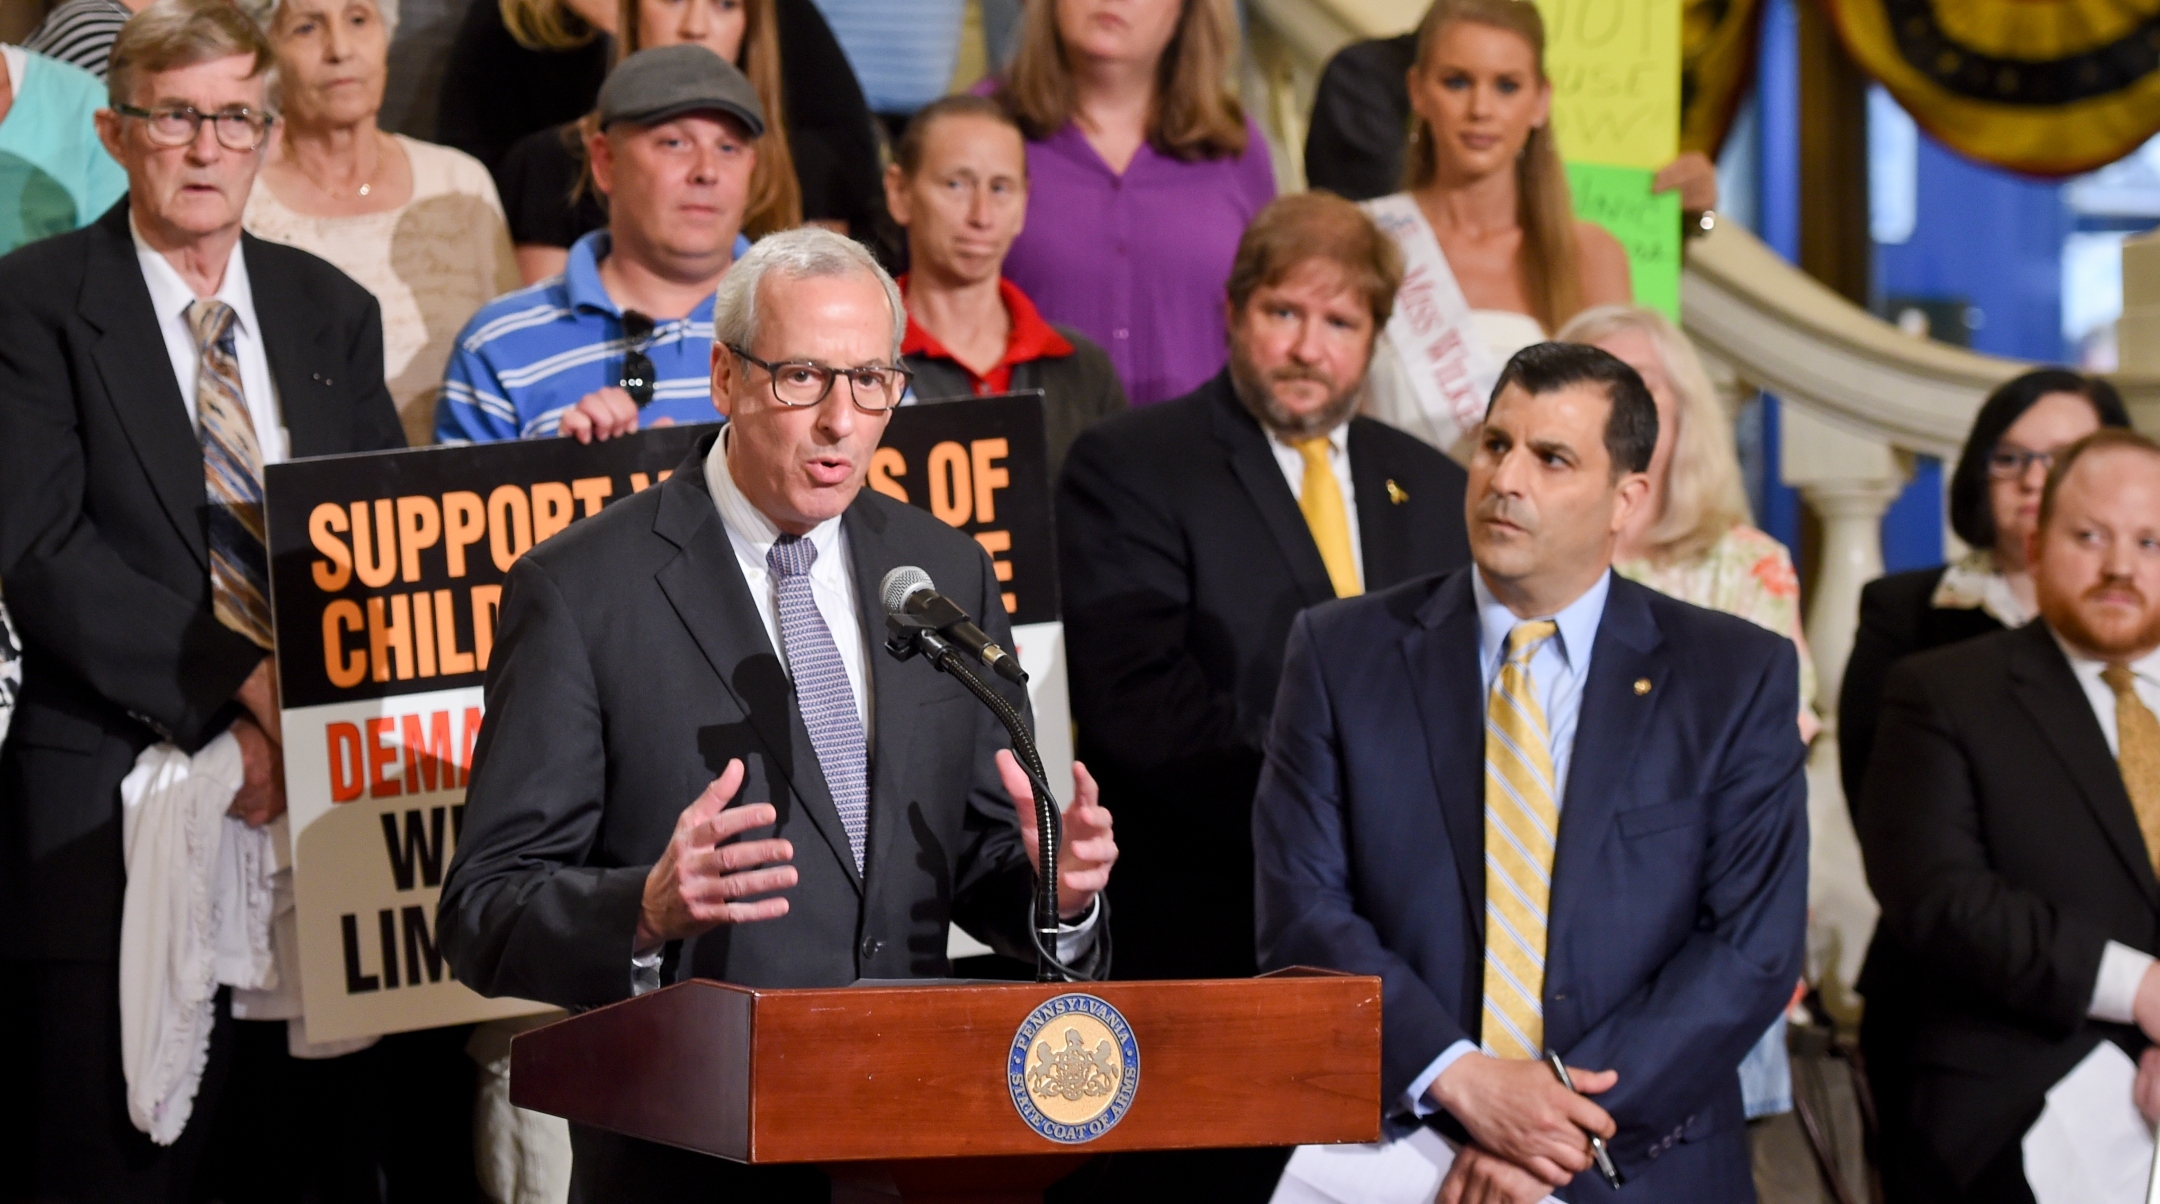 Pennsylvania State Rep. Dan Frankel speaks during a news conference in the rotunda of the Capitol in Harrisburg, Penn., June 12, 2018. (Natalie Kolb/MediaNews Group/Reading Eagle via Getty Images)